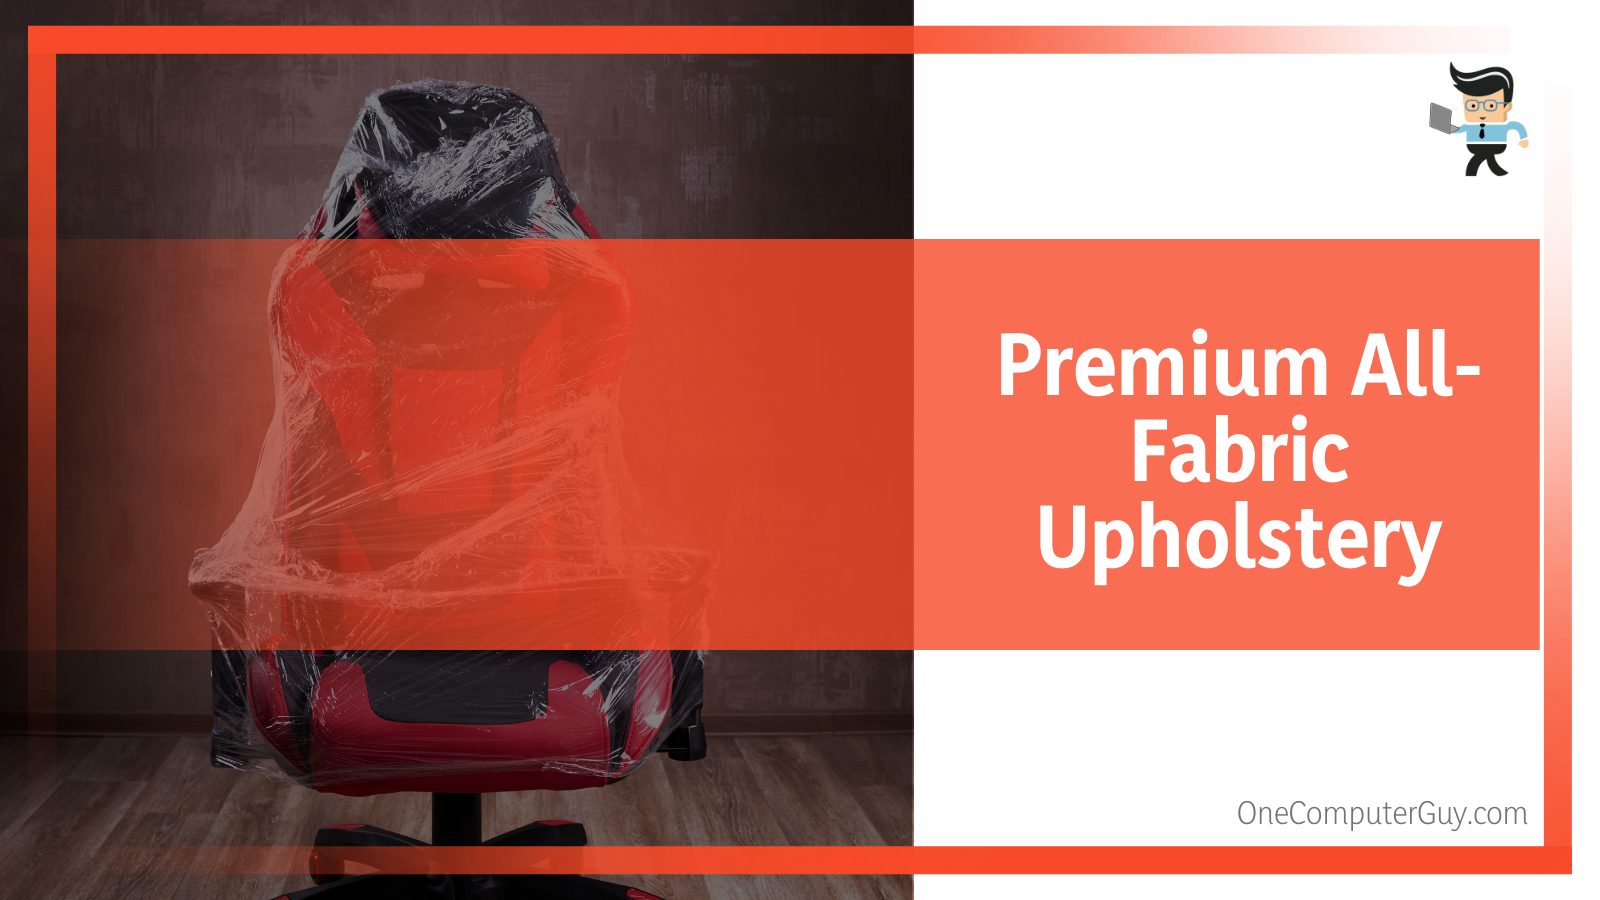 Premium All-Fabric Upholstery Gaming Chair